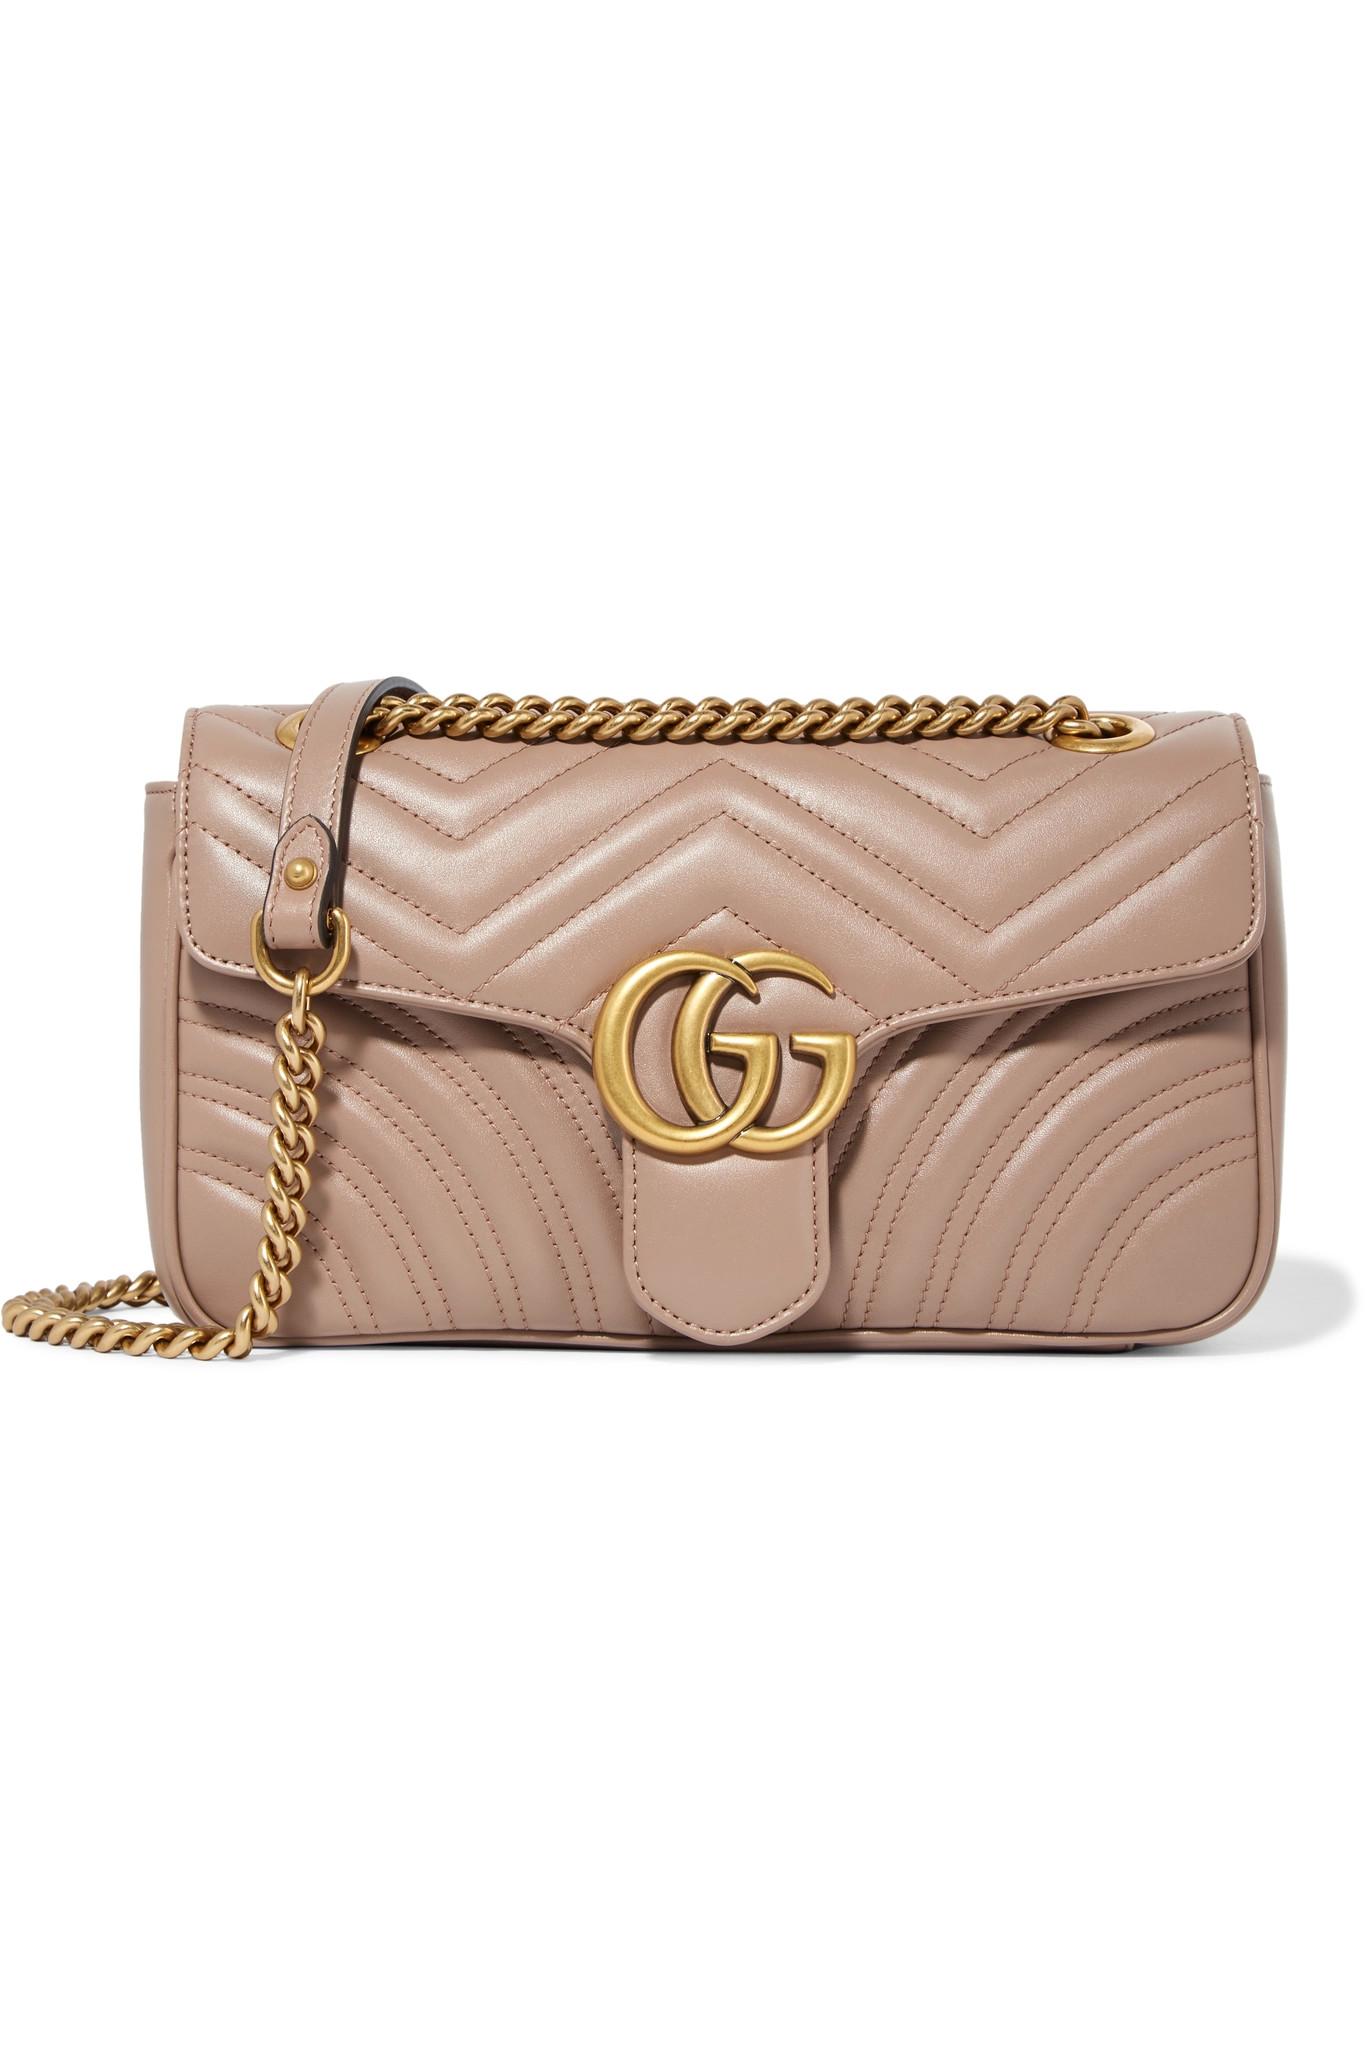 Gucci Petite Marmont Wallet On Chain Beige | SEMA Data Co-op